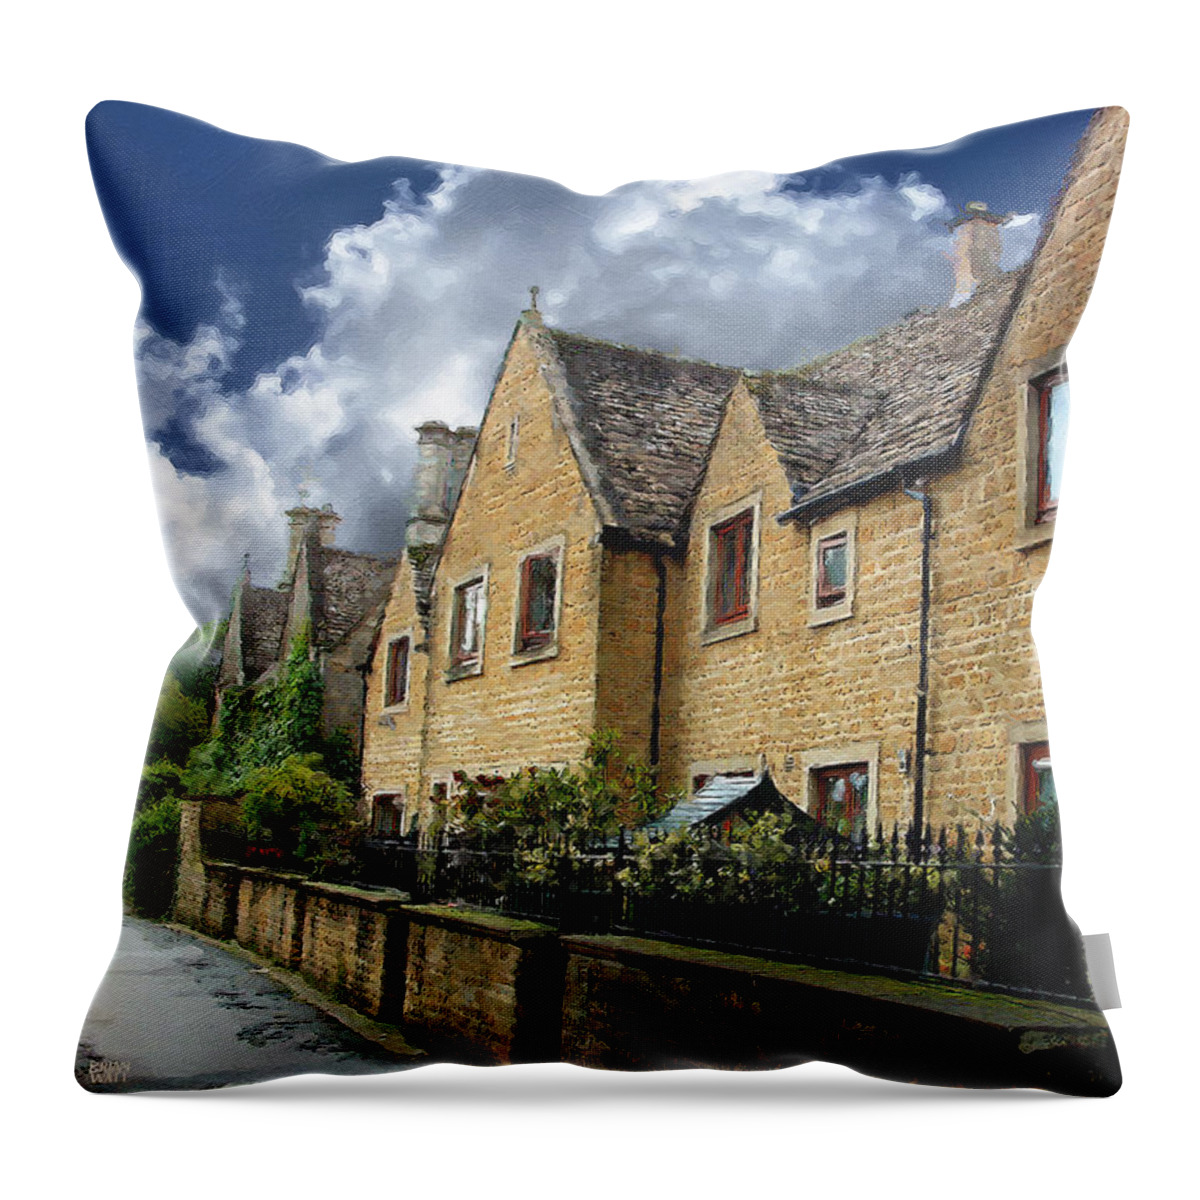 Bourton-on-the-water Throw Pillow featuring the photograph Bourton Row Houses by Brian Watt